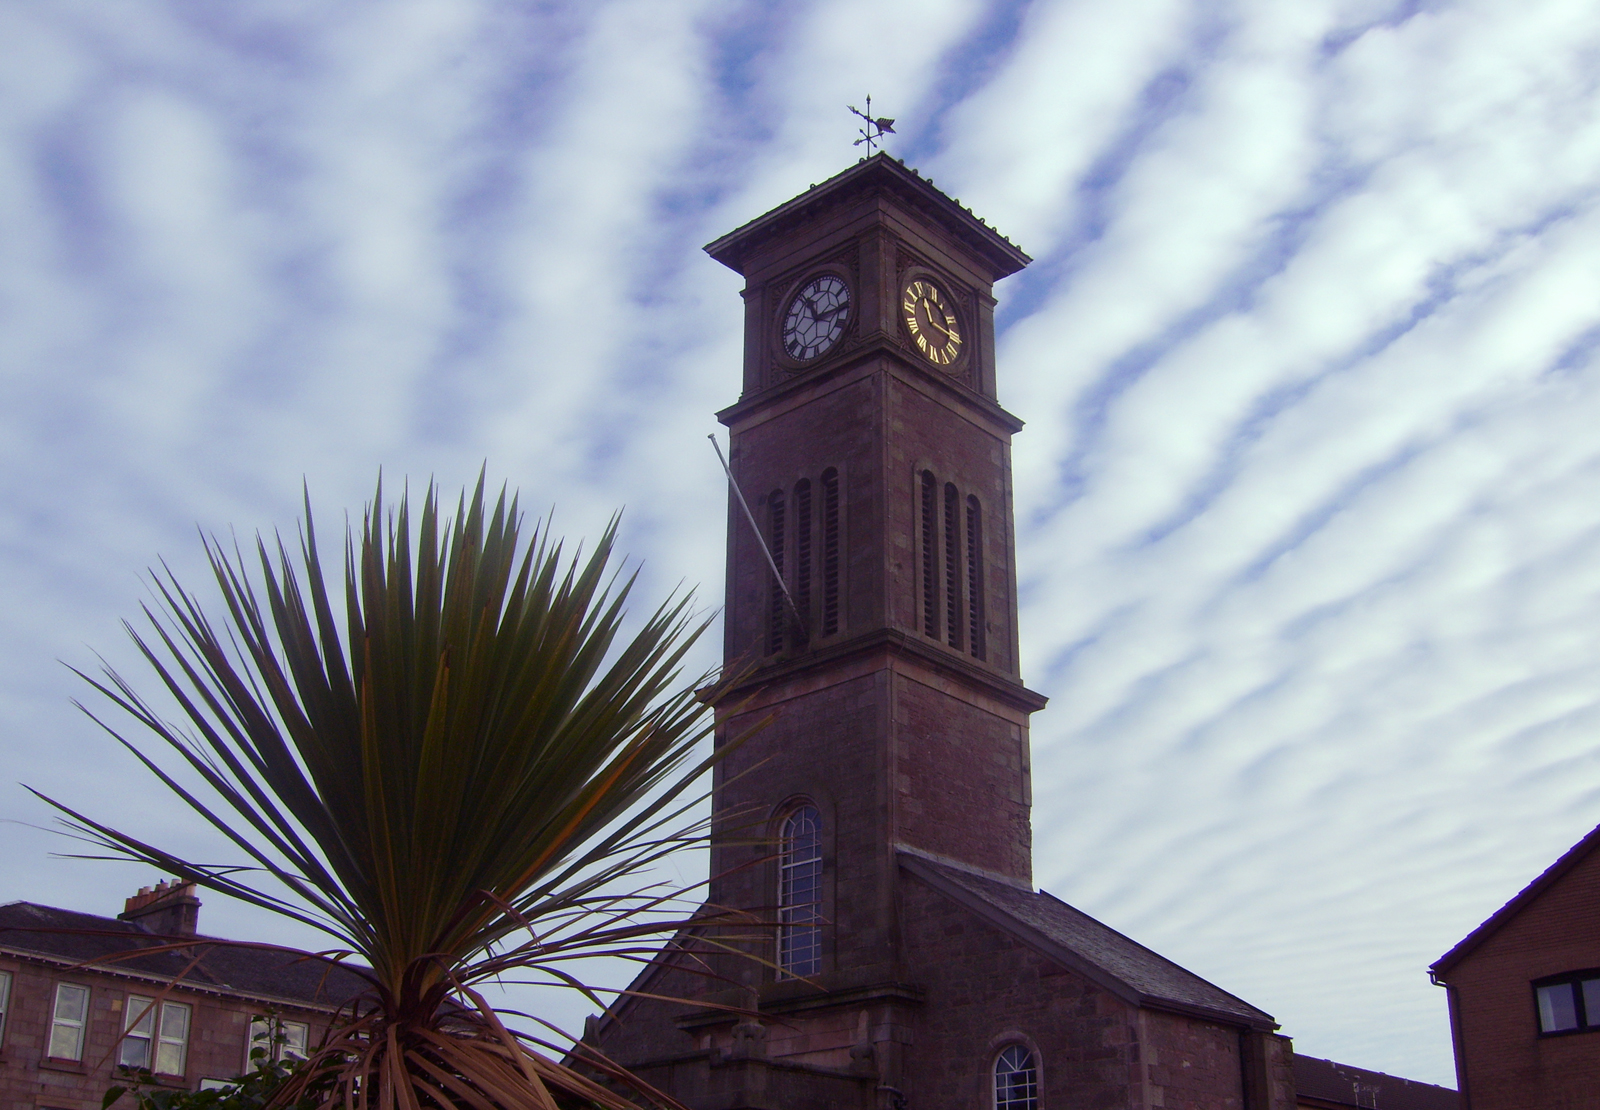 The clock tower, helensburgh photo